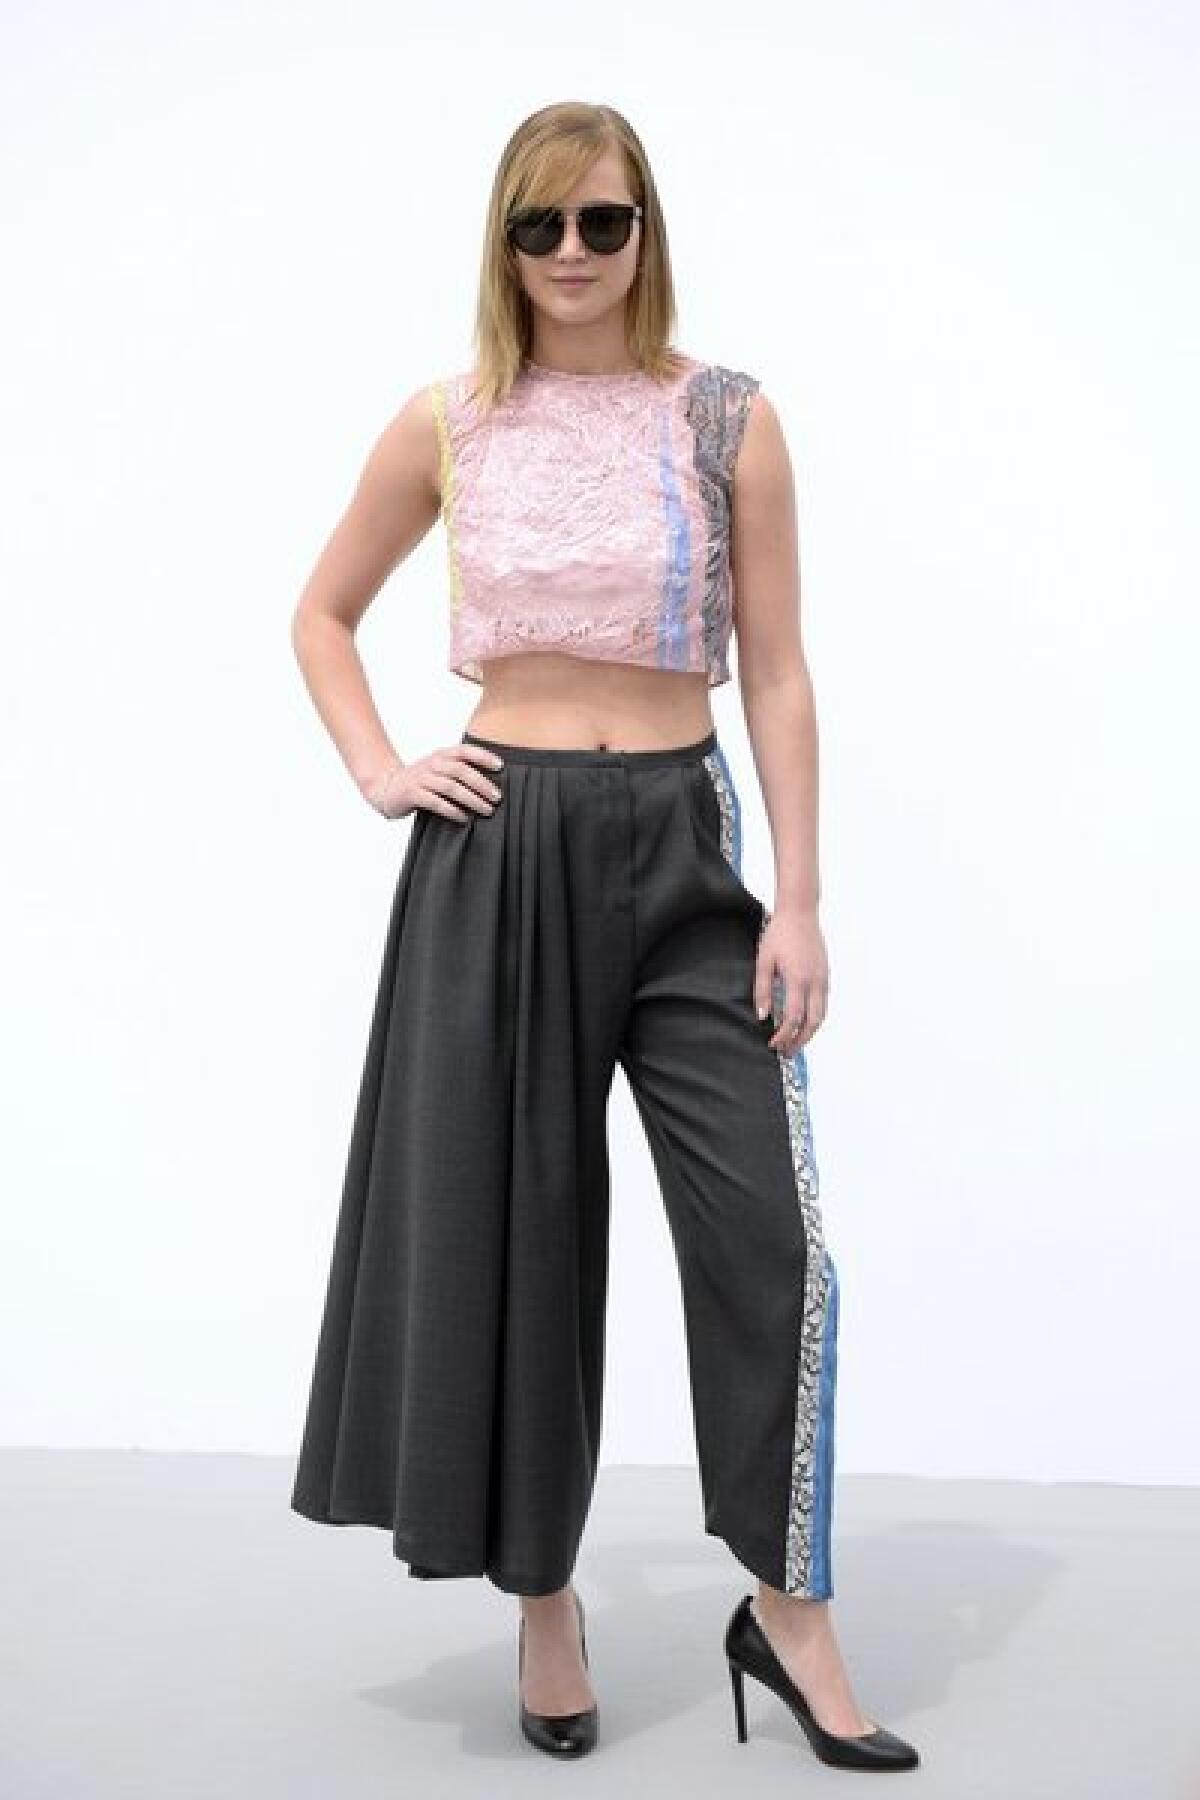 Jennifer Lawrence shows off a pair of interesting Dior pants as she attends the Christian Dior haute couture autumn/winter 2013-2014 show in Paris.